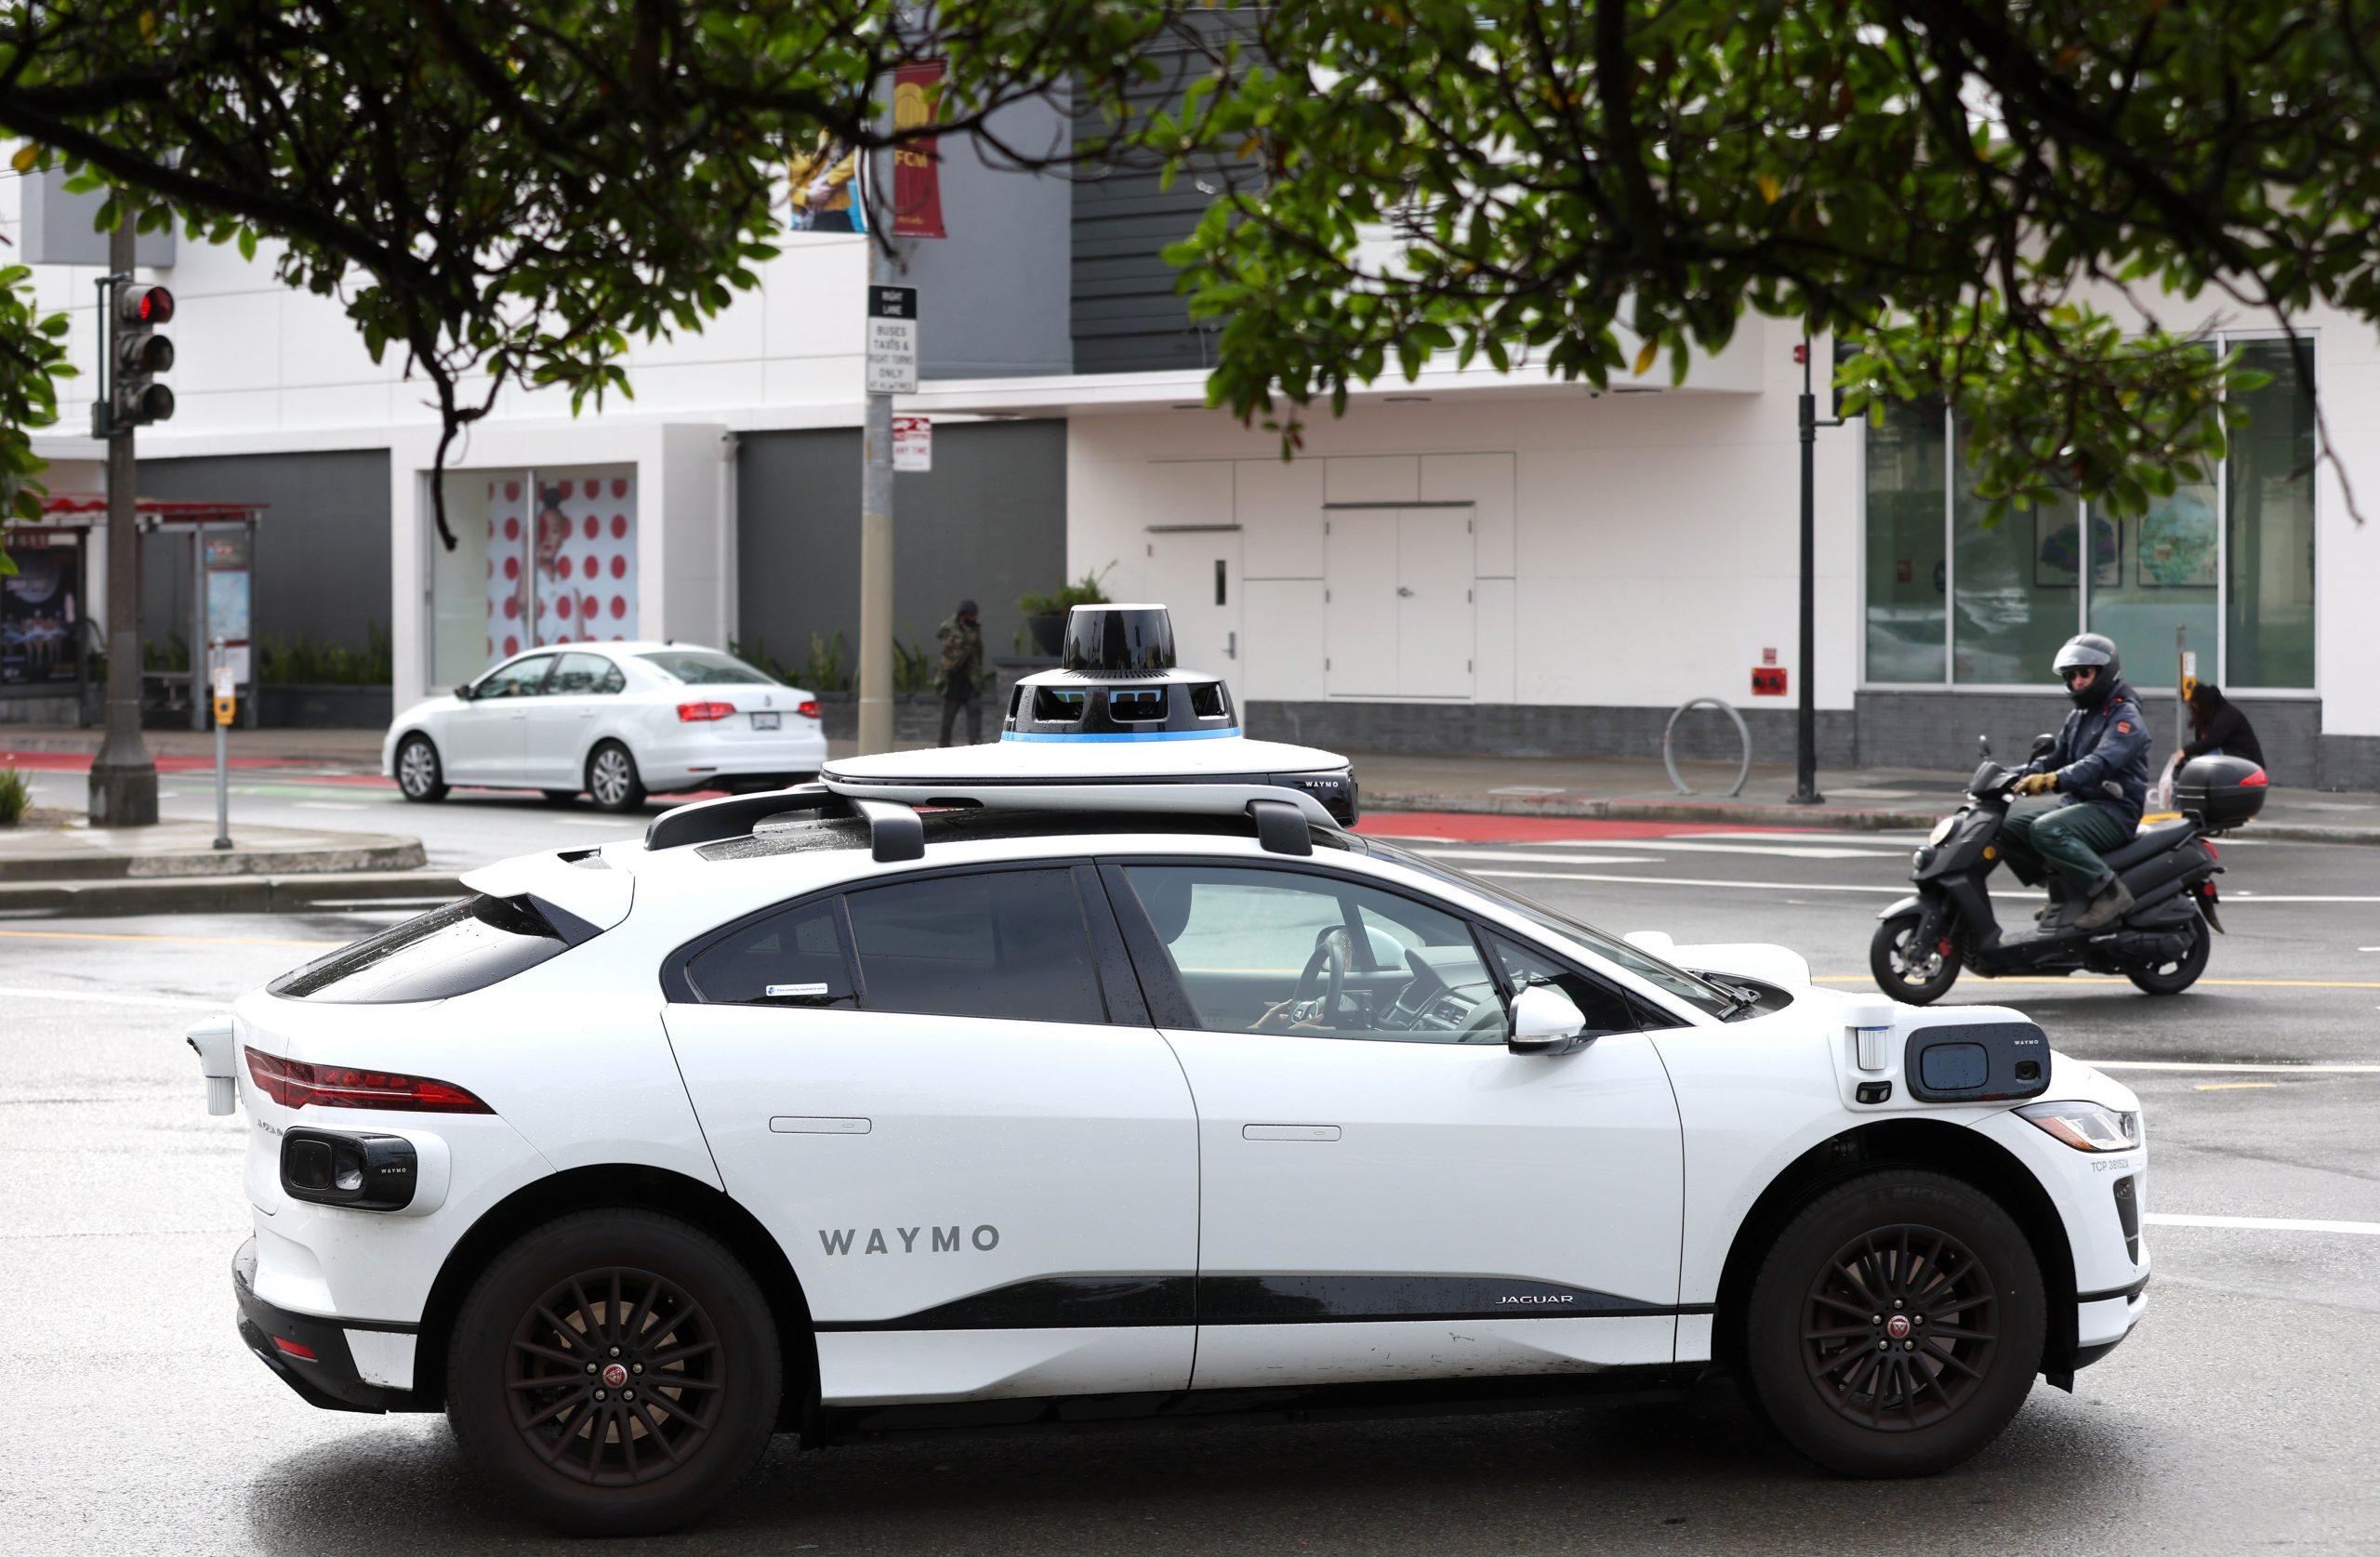 Waymo driverless rides are coming to Los Angeles